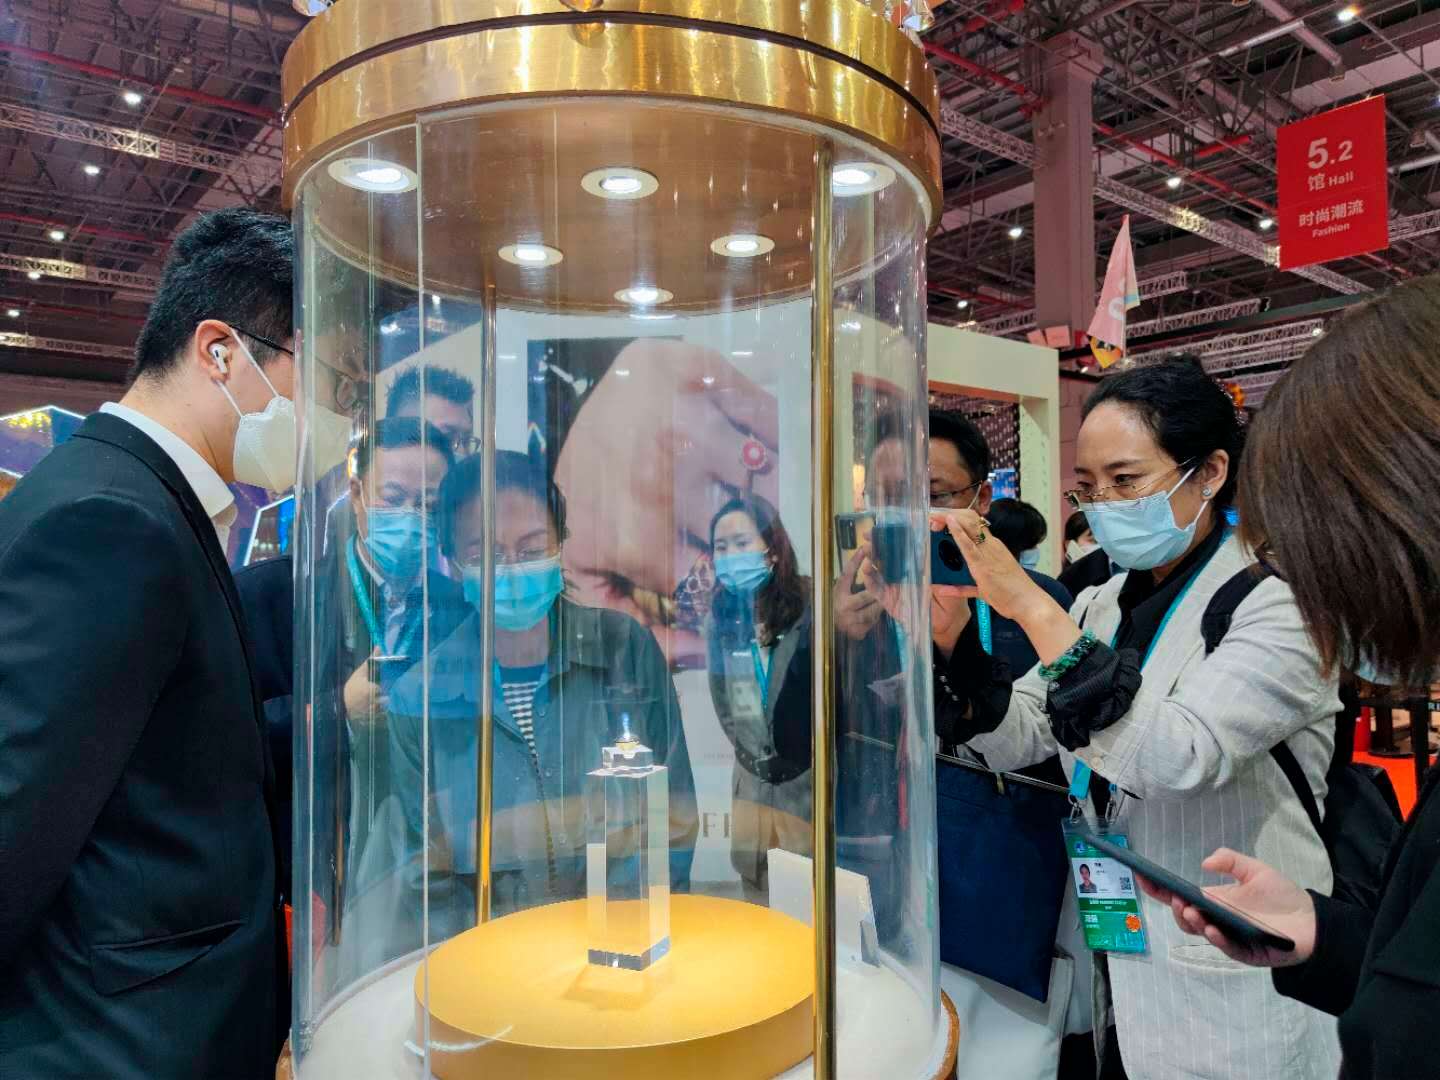 An 88-carat super black diamond, is on display at the 2020 China International Import Expo in Shanghai.